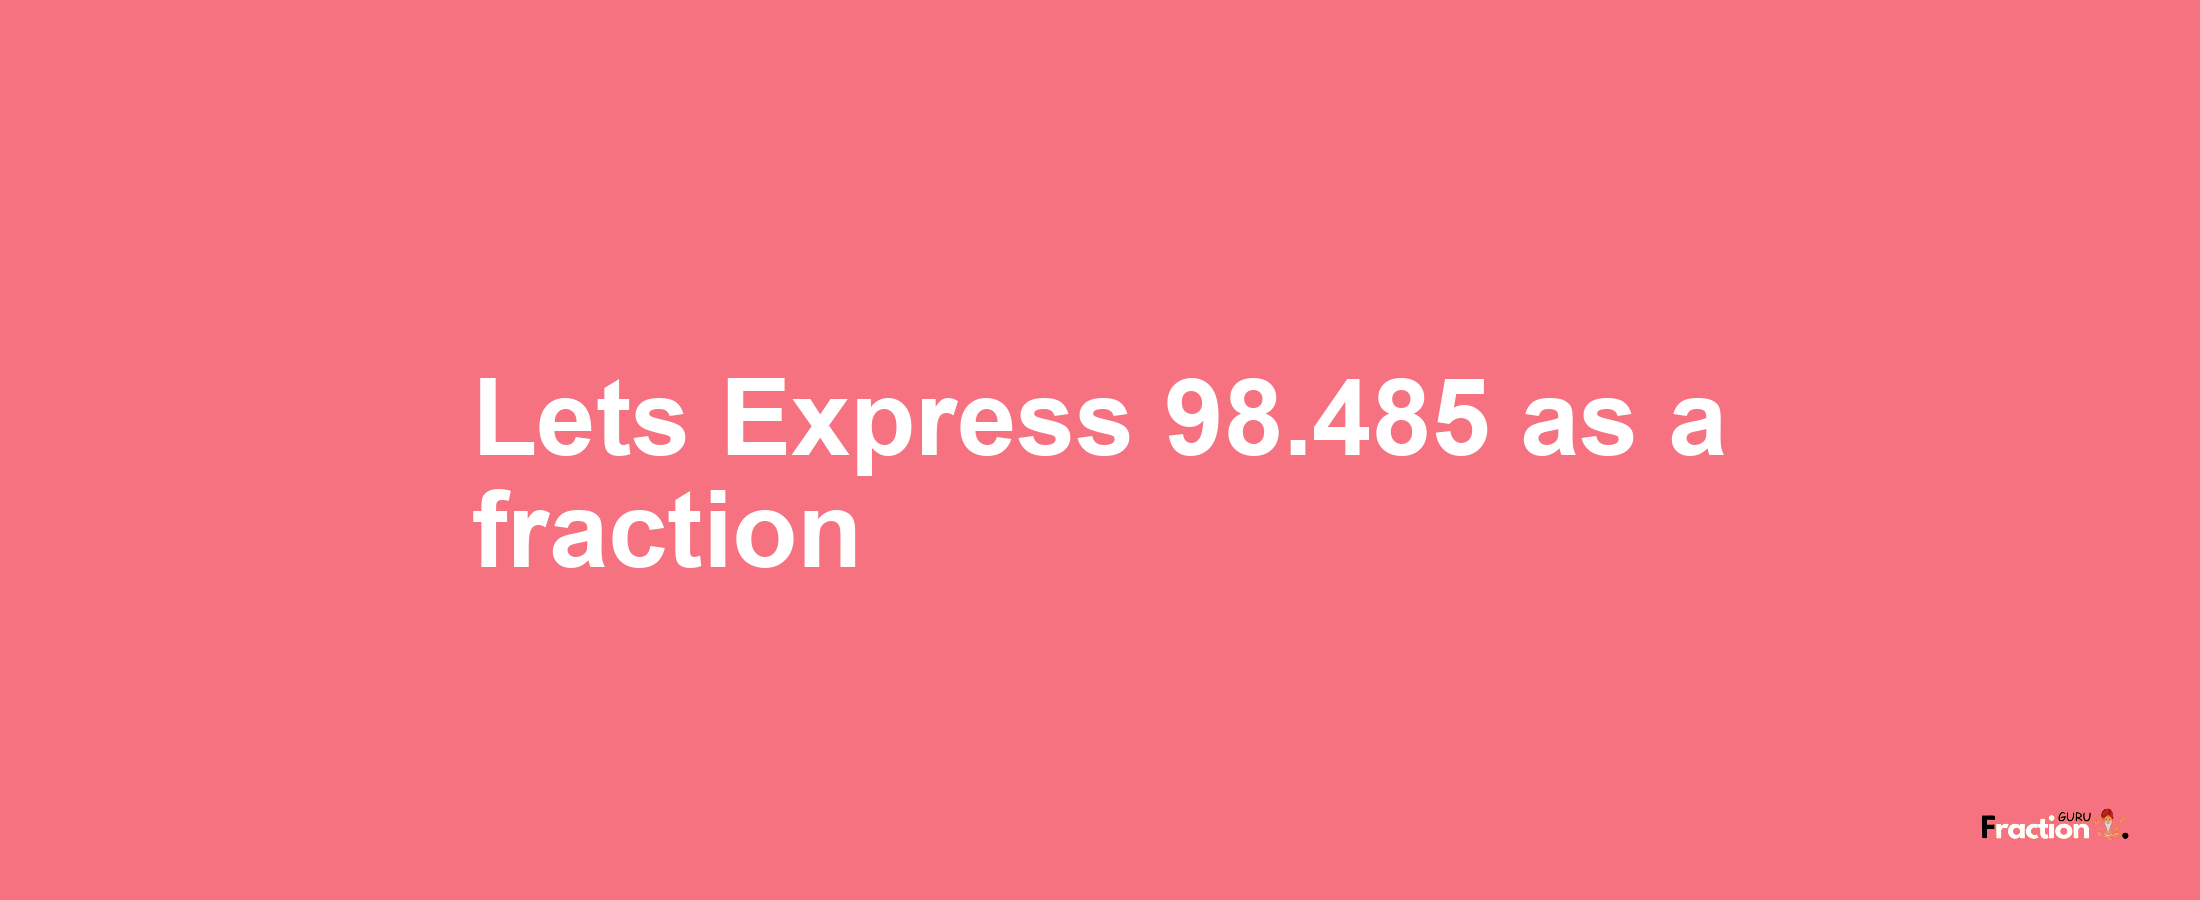 Lets Express 98.485 as afraction